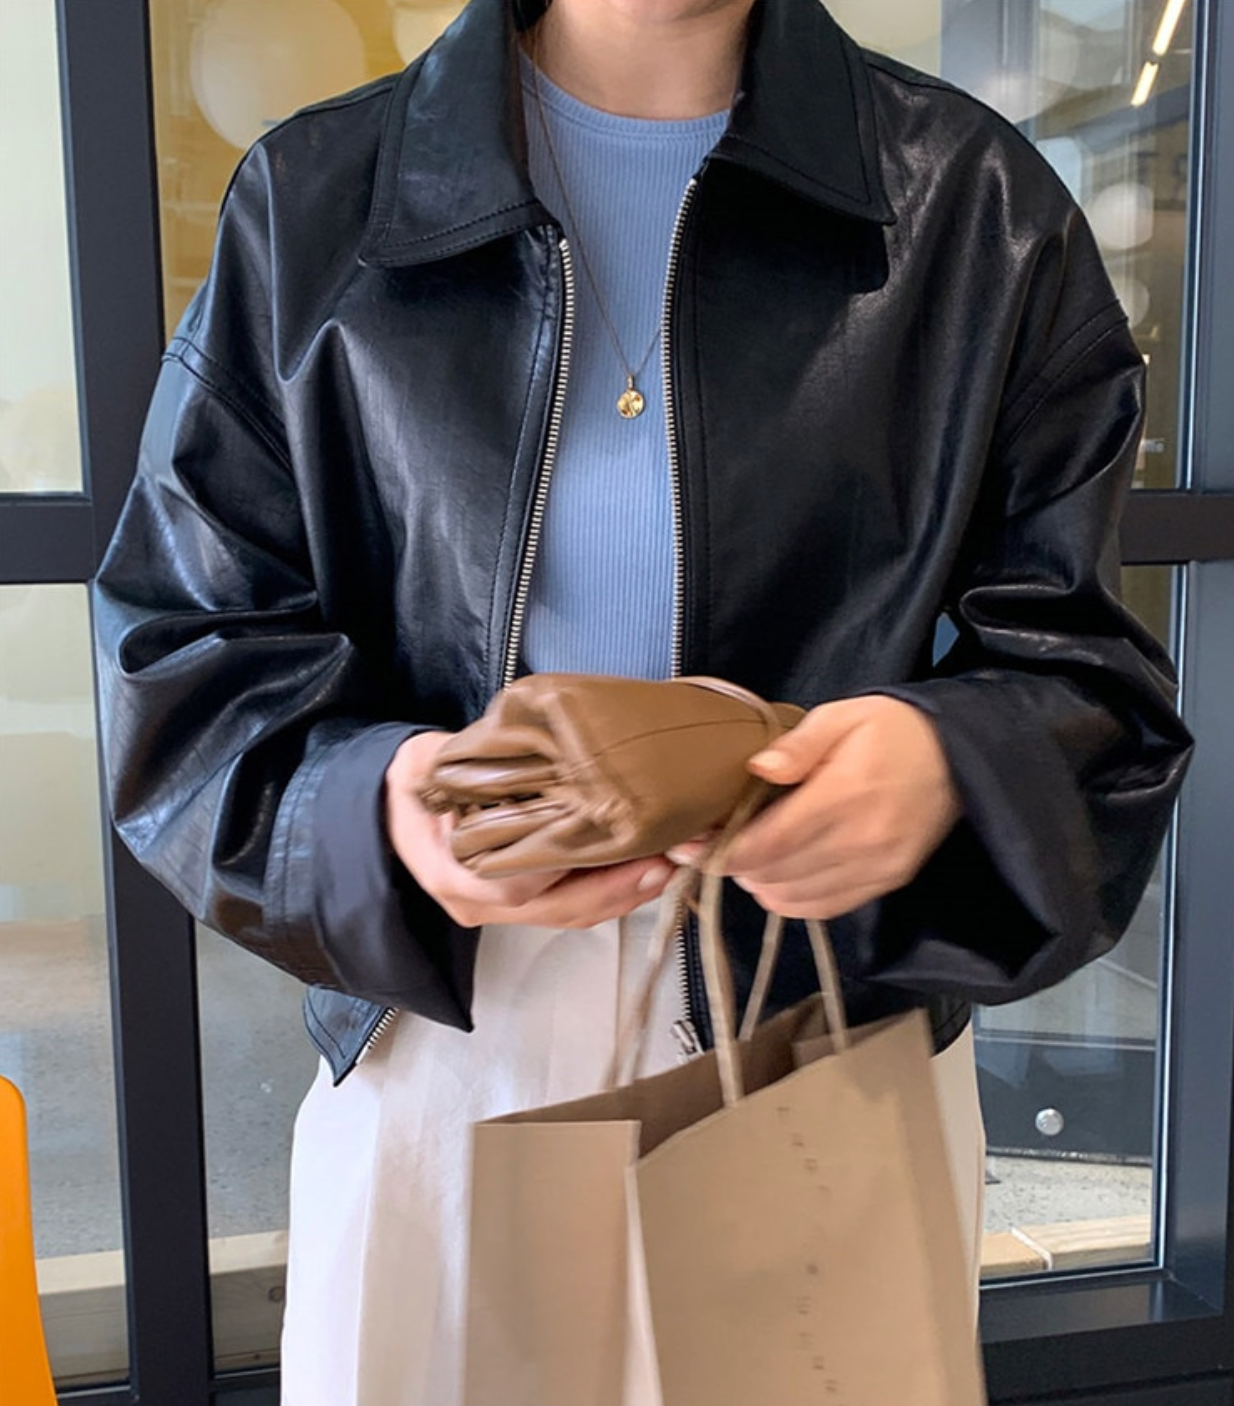 New Handbag Purchase + Faux Leather Jacket Look